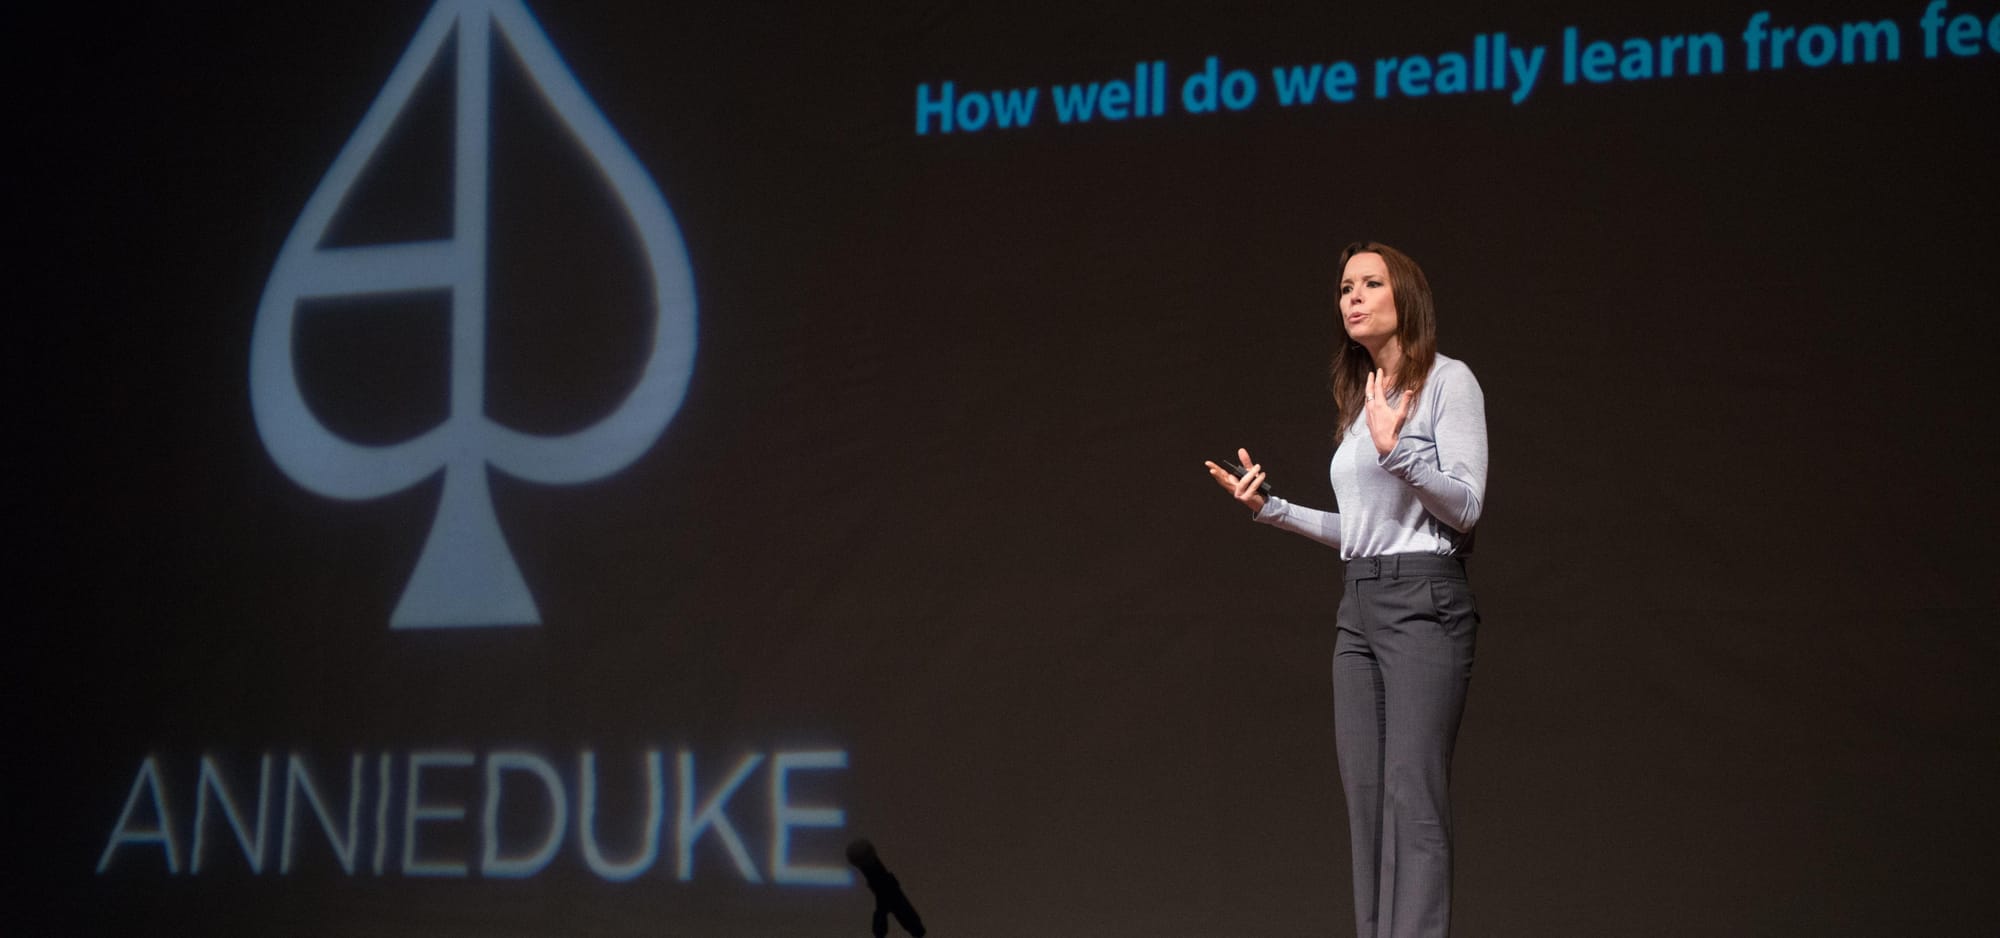 Photo of Annie Duke at a speaking event